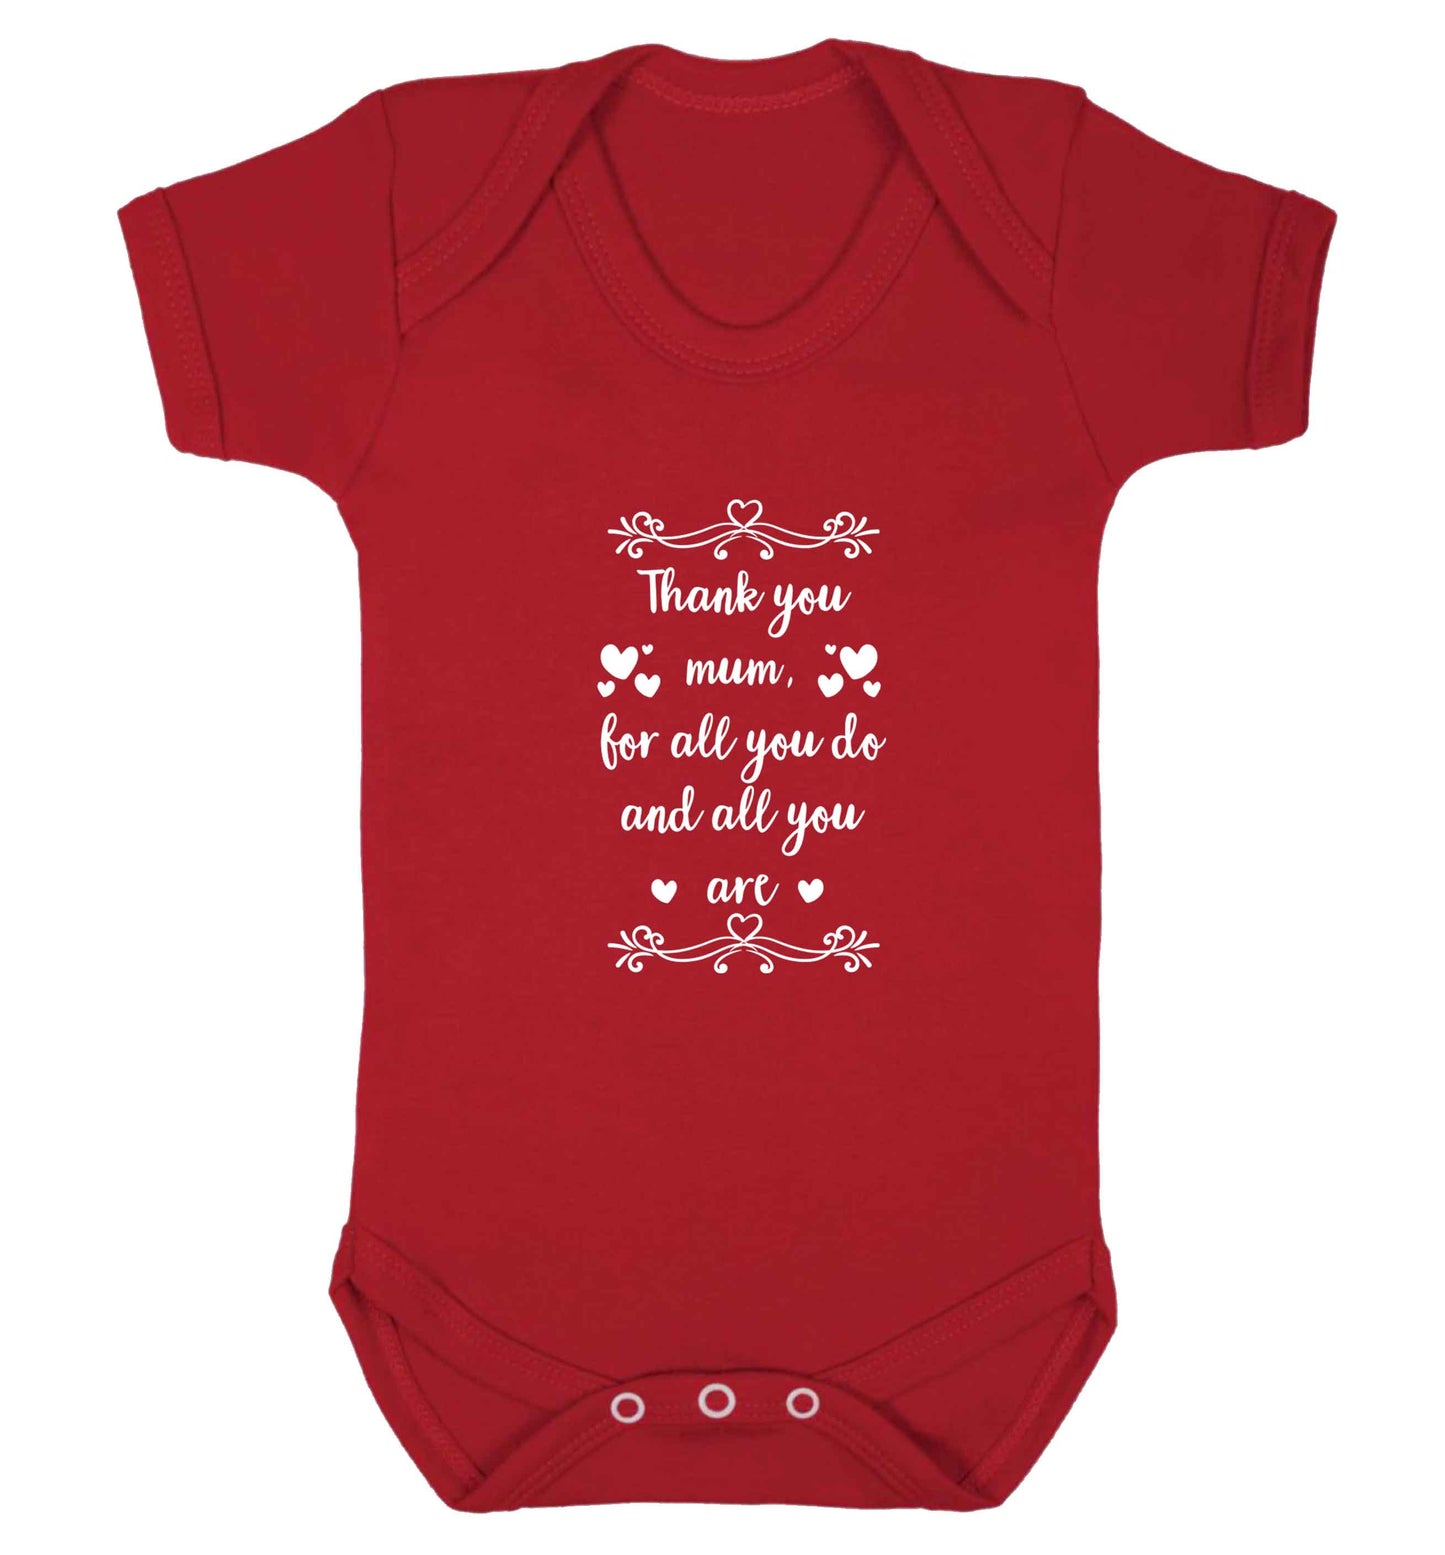 Gorgeous gifts for mums on mother's day! Thank you mum for all you do and all you are baby vest red 18-24 months